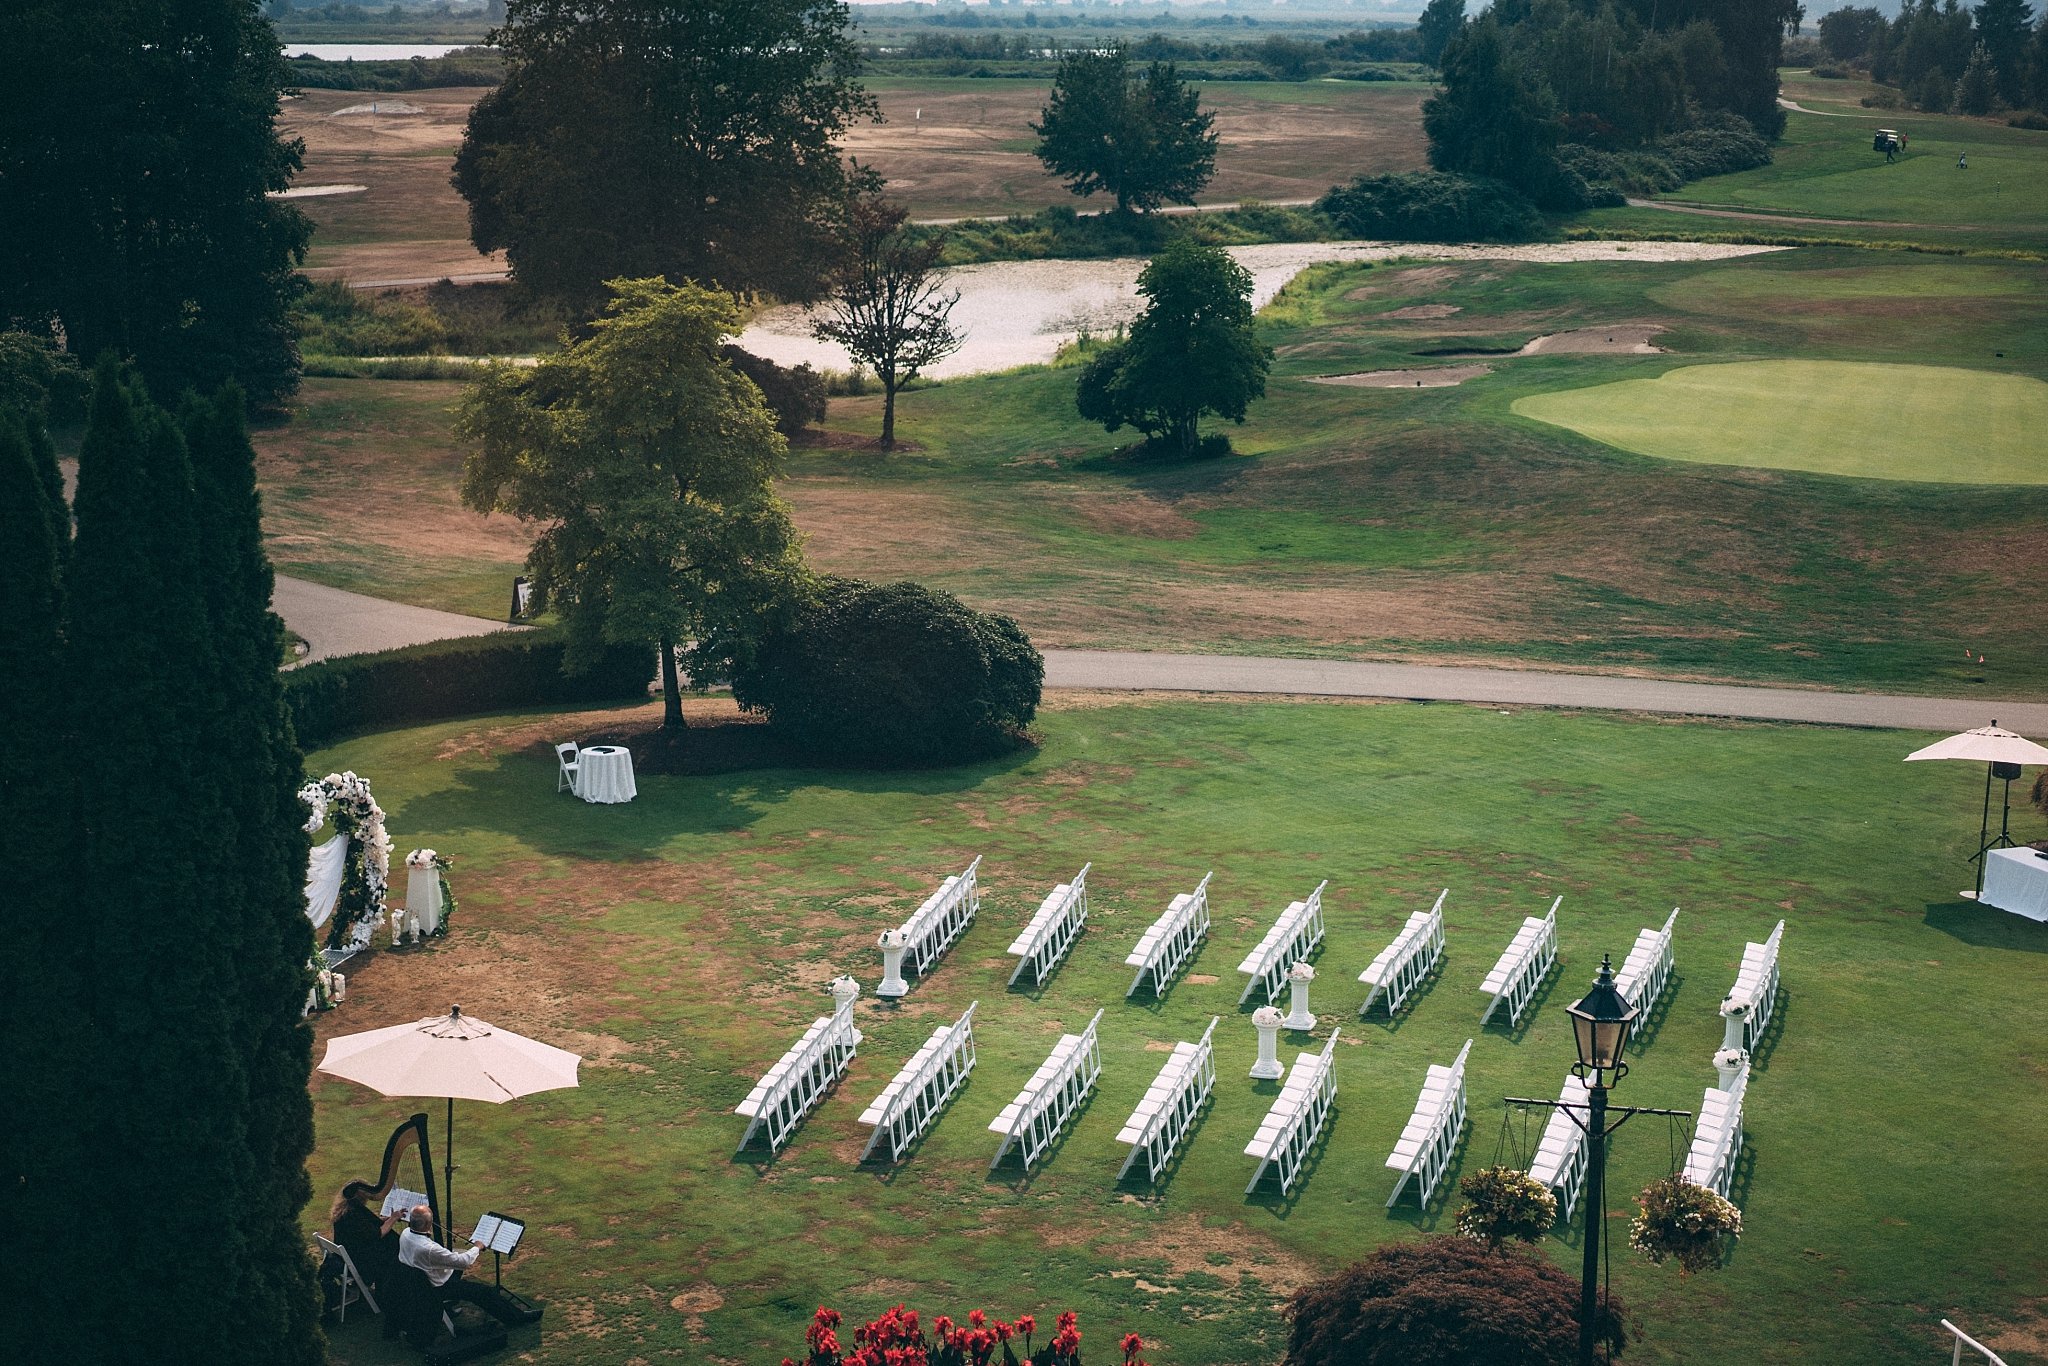 pitt meadows outdoor wedding ceremony set up chairs